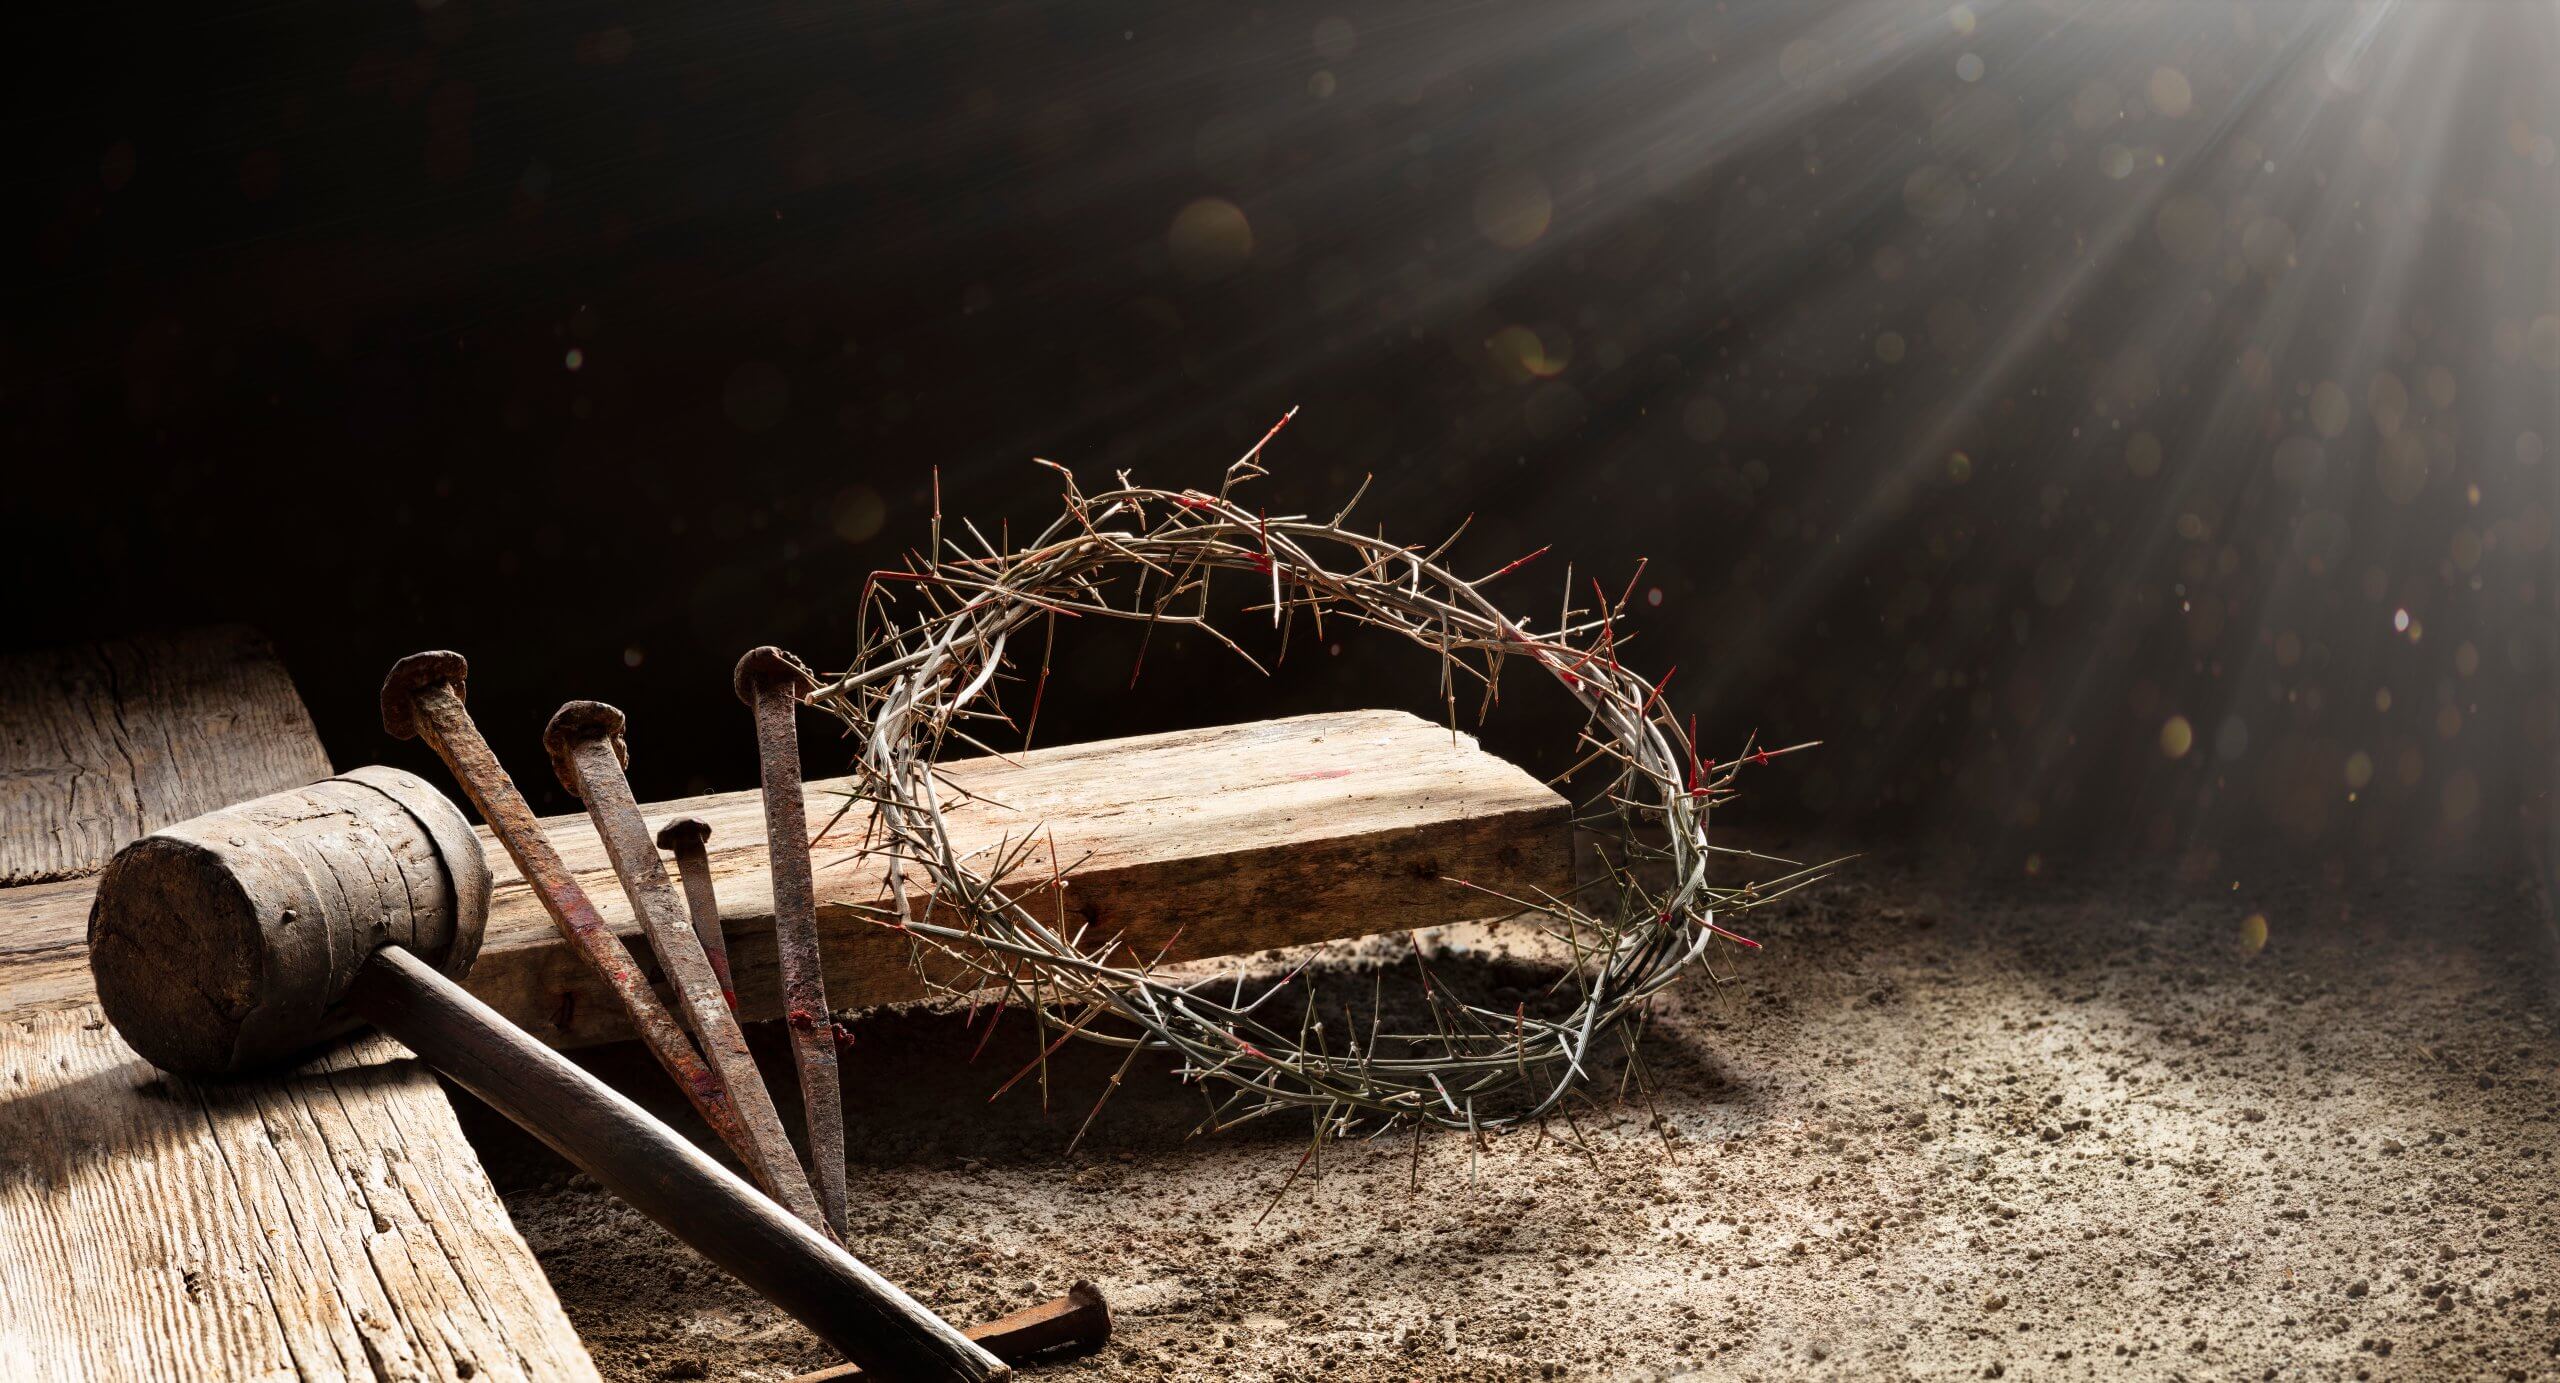 What's so good about Good Friday?